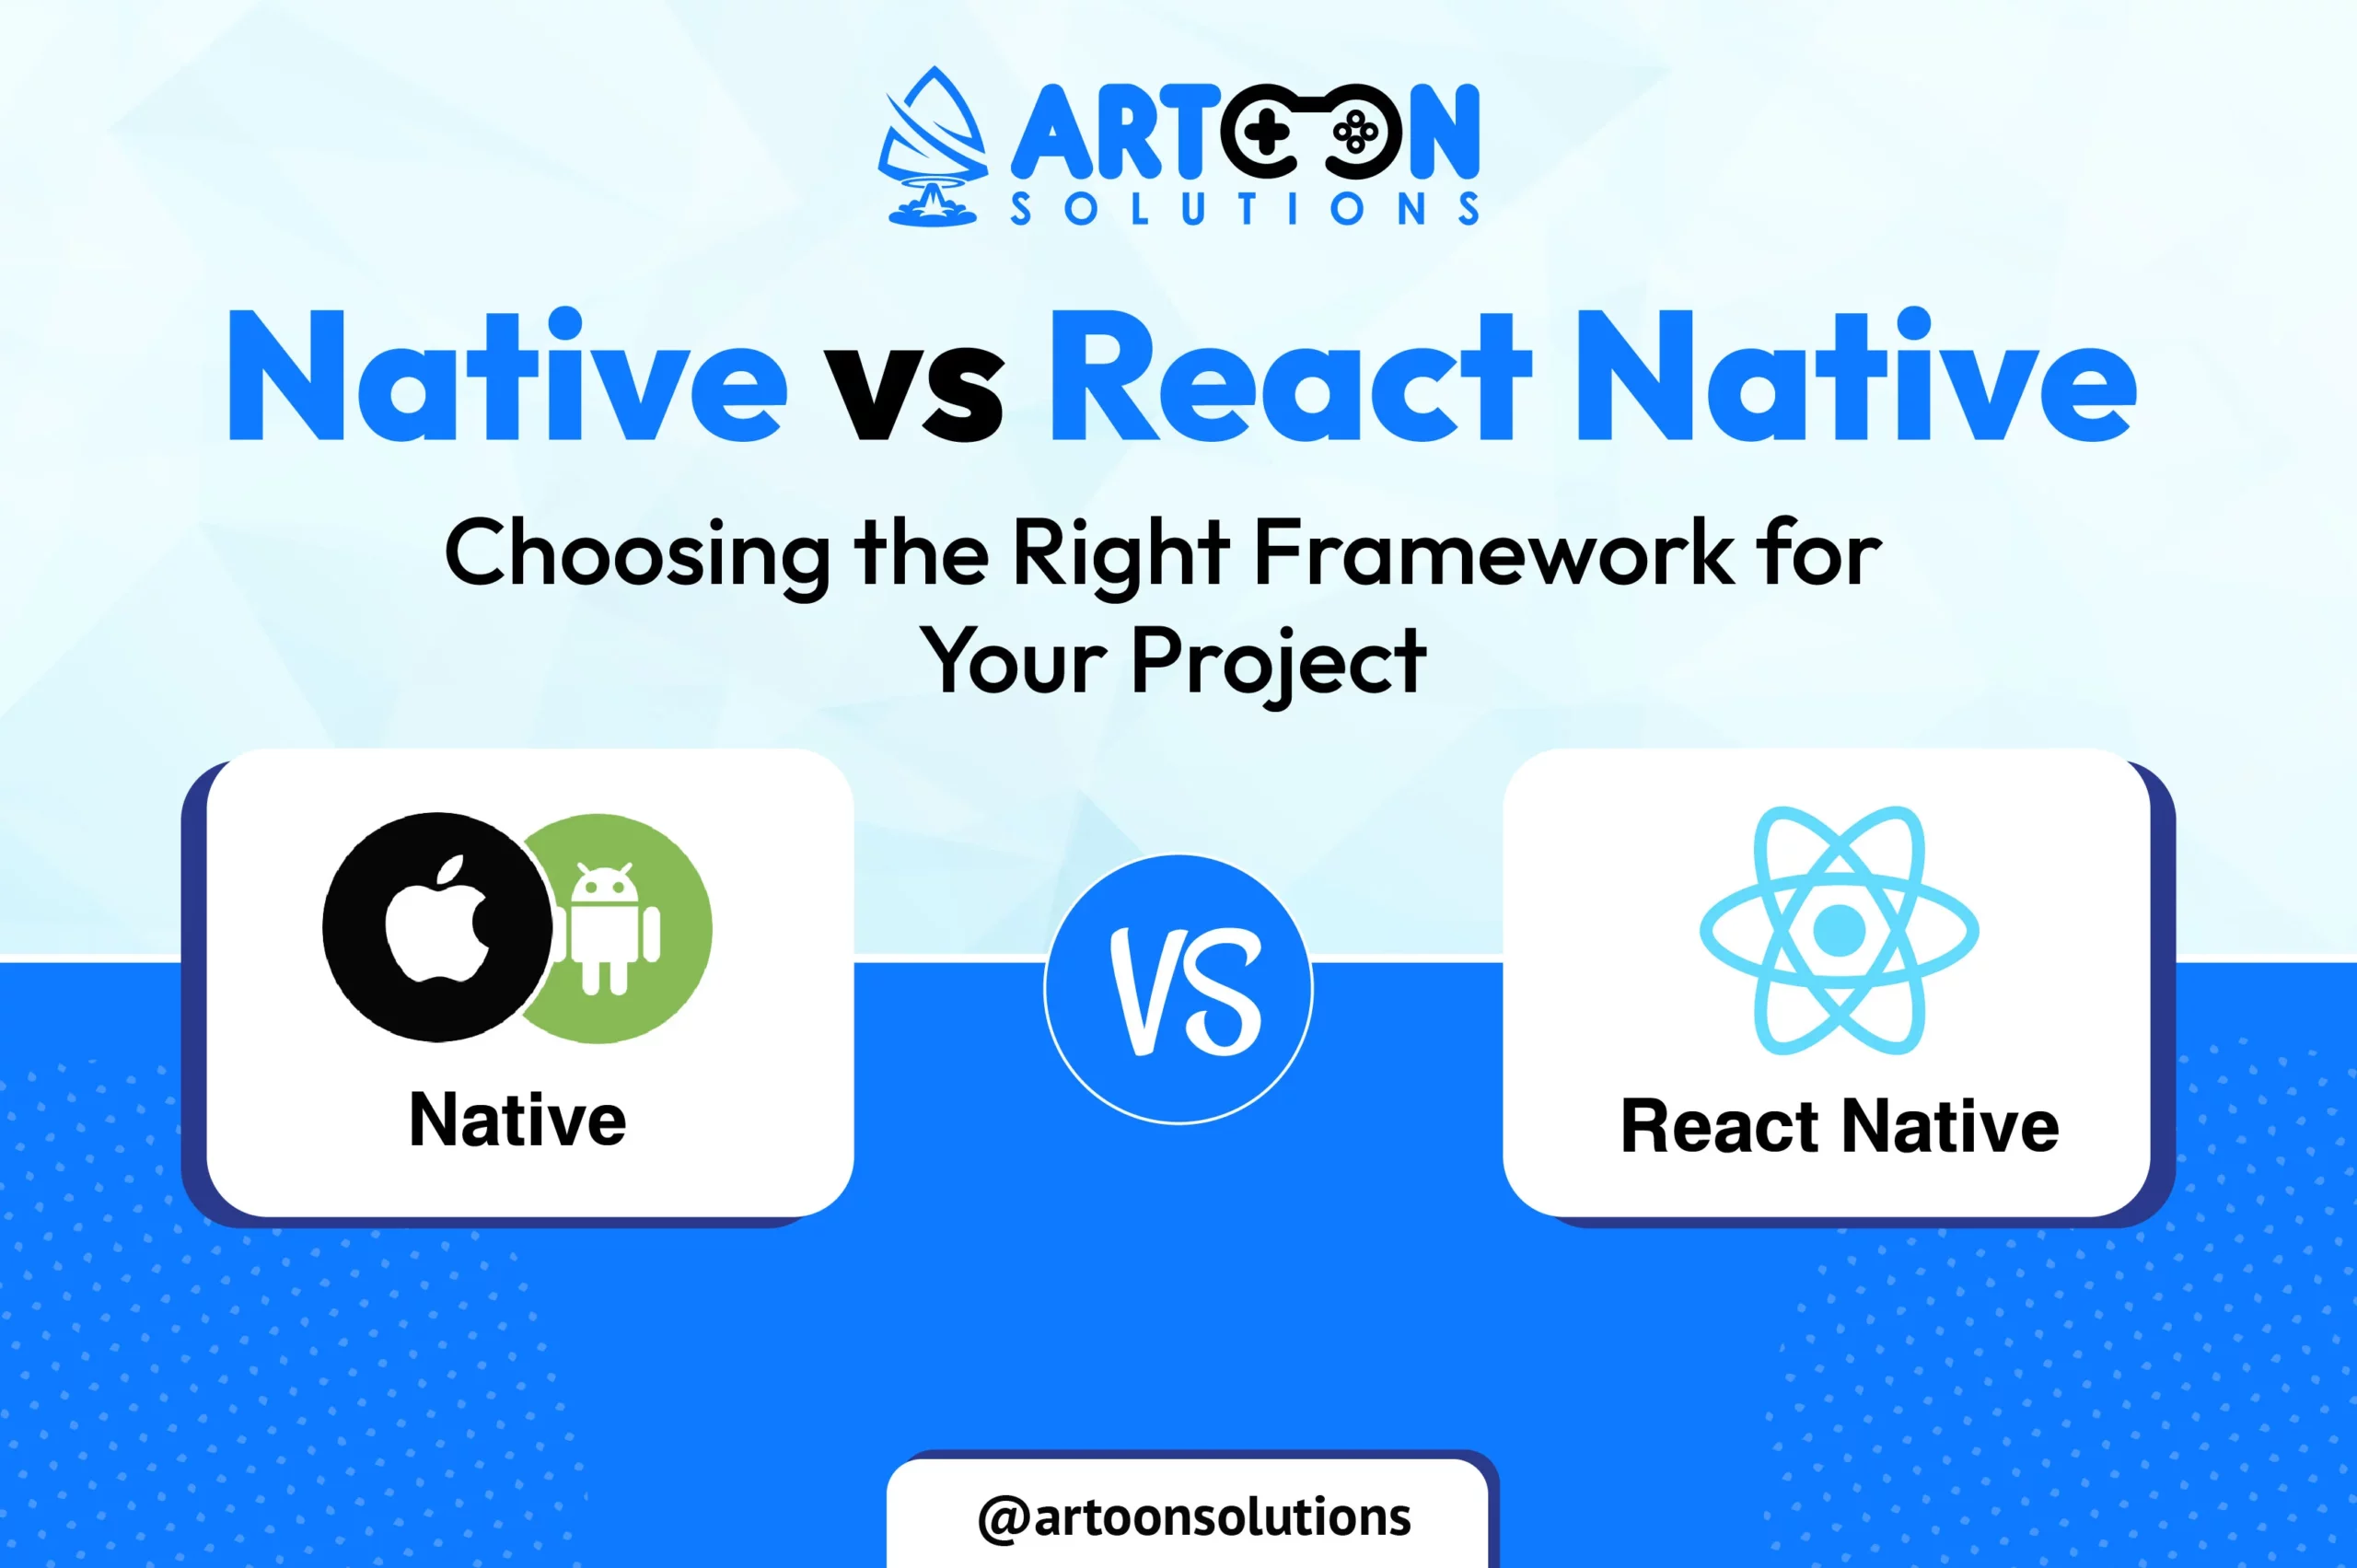 Native vs React Native: Choosing the Right Framework for Your Project